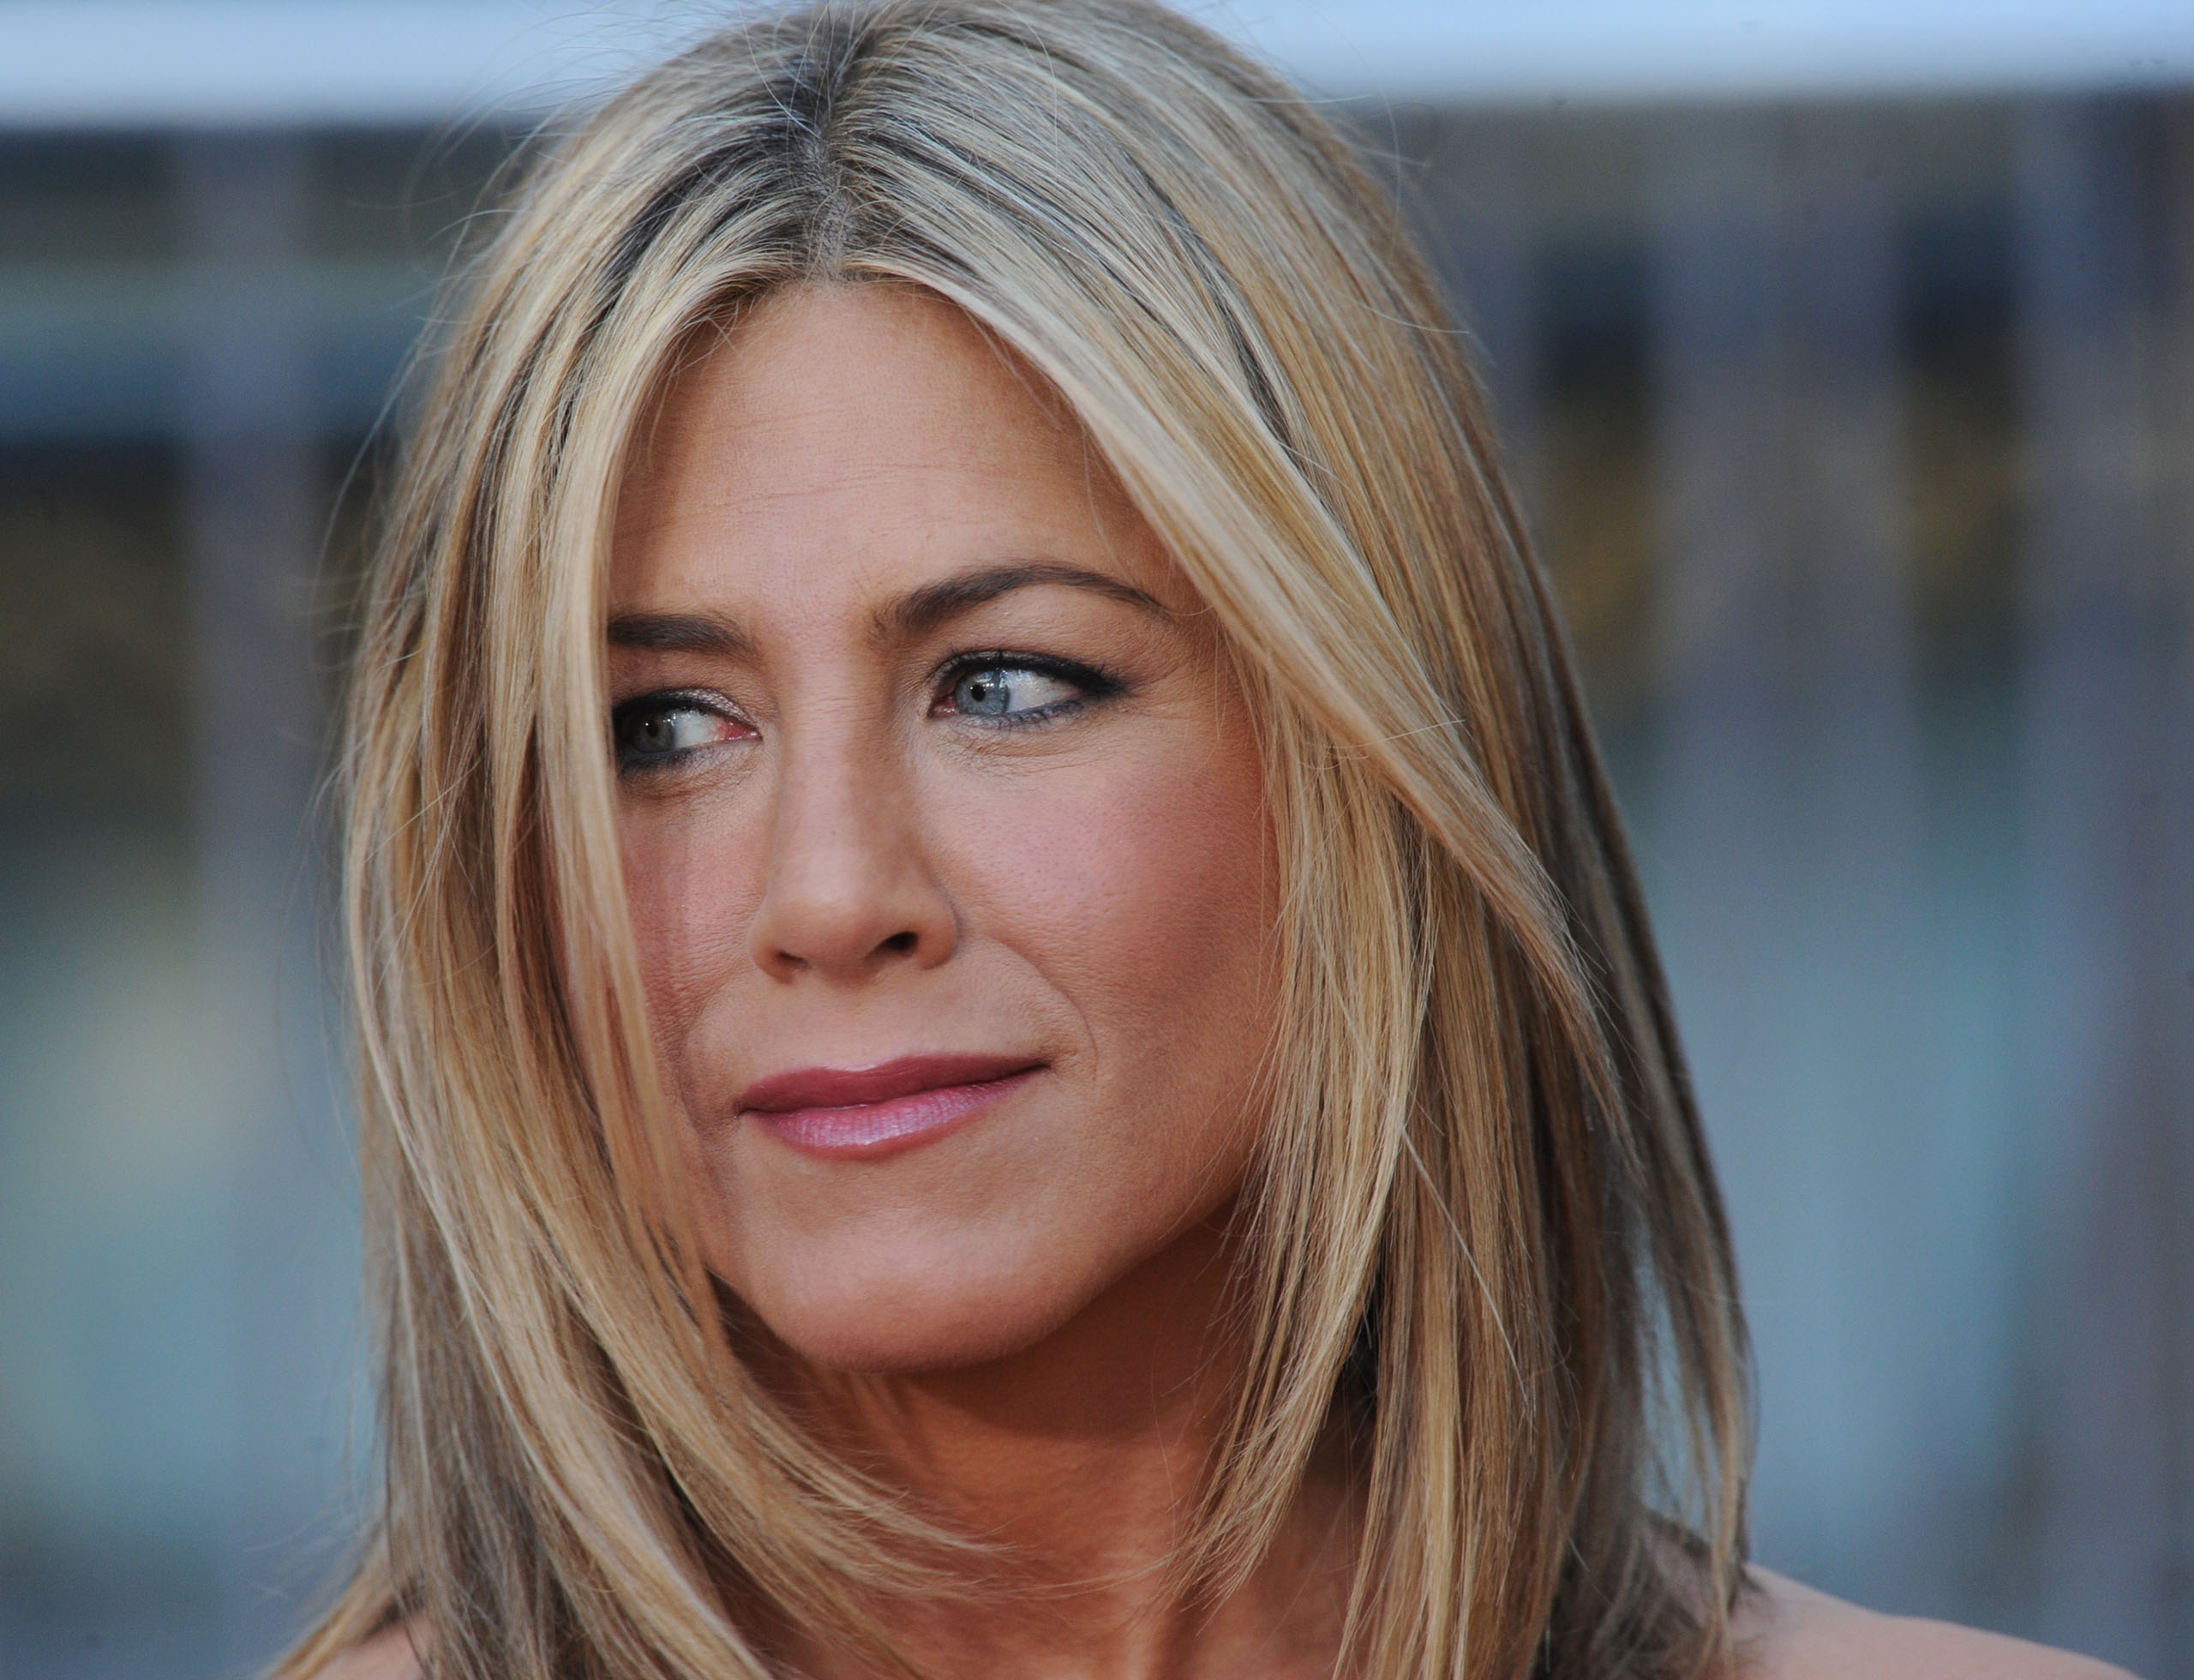 Jennifer Aniston New Hd Look Wallpaper, HD Celebrities 4K Wallpapers, Images,  Photos and Background - Wallpapers Den